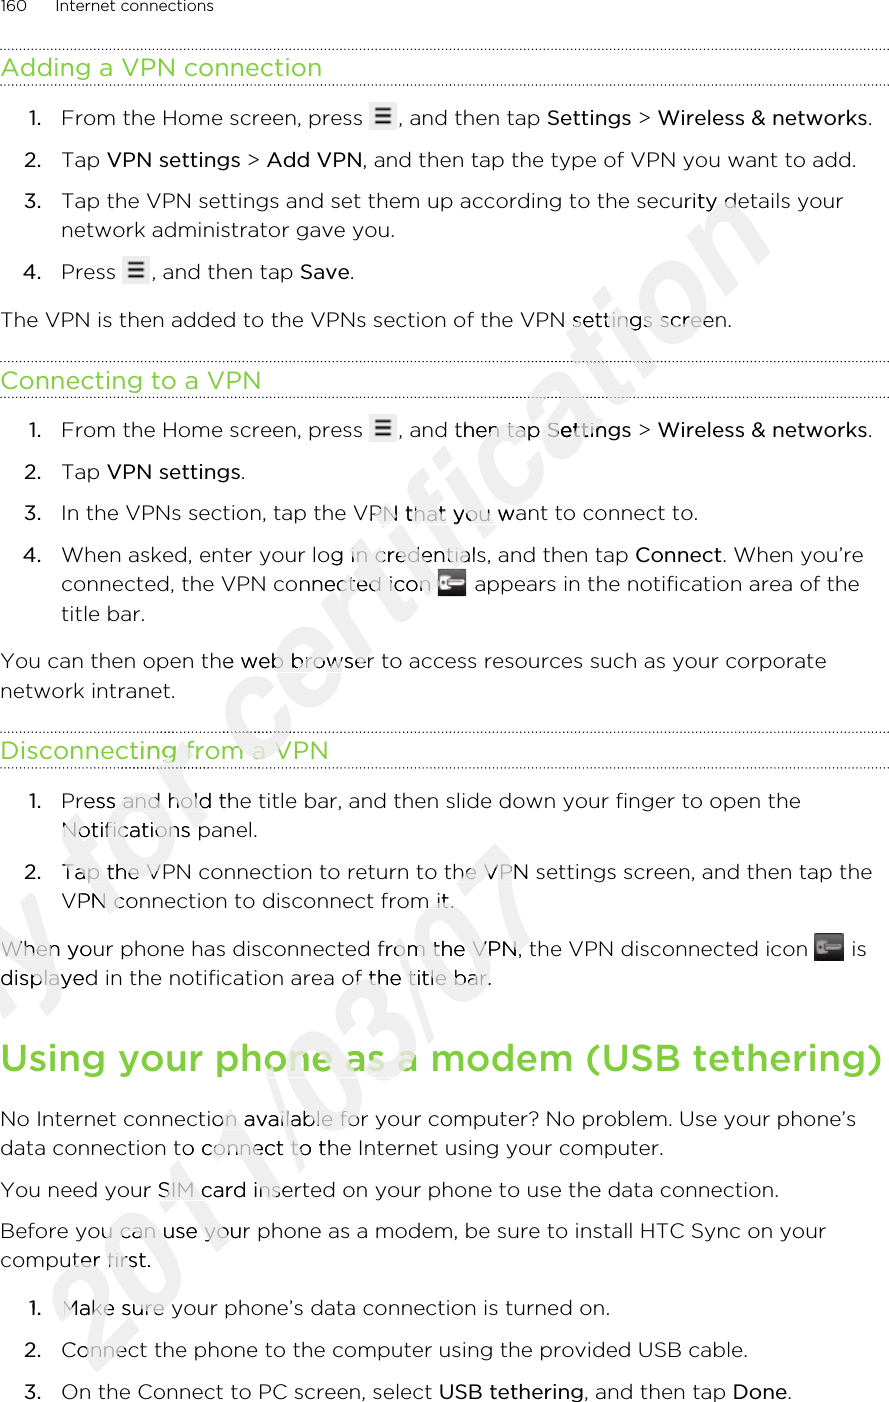 Adding a VPN connection1. From the Home screen, press  , and then tap Settings &gt; Wireless &amp; networks.2. Tap VPN settings &gt; Add VPN, and then tap the type of VPN you want to add.3. Tap the VPN settings and set them up according to the security details yournetwork administrator gave you.4. Press  , and then tap Save.The VPN is then added to the VPNs section of the VPN settings screen.Connecting to a VPN1. From the Home screen, press  , and then tap Settings &gt; Wireless &amp; networks.2. Tap VPN settings.3. In the VPNs section, tap the VPN that you want to connect to.4. When asked, enter your log in credentials, and then tap Connect. When you’reconnected, the VPN connected icon   appears in the notification area of thetitle bar.You can then open the web browser to access resources such as your corporatenetwork intranet.Disconnecting from a VPN1. Press and hold the title bar, and then slide down your finger to open theNotifications panel.2. Tap the VPN connection to return to the VPN settings screen, and then tap theVPN connection to disconnect from it.When your phone has disconnected from the VPN, the VPN disconnected icon   isdisplayed in the notification area of the title bar.Using your phone as a modem (USB tethering)No Internet connection available for your computer? No problem. Use your phone’sdata connection to connect to the Internet using your computer.You need your SIM card inserted on your phone to use the data connection.Before you can use your phone as a modem, be sure to install HTC Sync on yourcomputer first.1. Make sure your phone’s data connection is turned on.2. Connect the phone to the computer using the provided USB cable.3. On the Connect to PC screen, select USB tethering, and then tap Done.160 Internet connectionsOnly When your phone has disconnected from the VPN, the VPN disconnected icon Only When your phone has disconnected from the VPN, the VPN disconnected icon displayed in the notification area of the title bar.Only displayed in the notification area of the title bar.Using your phone as a modem (USB tethering)Only Using your phone as a modem (USB tethering)for Disconnecting from a VPNfor Disconnecting from a VPNfor for for Press and hold the title bar, and then slide down your finger to open thefor Press and hold the title bar, and then slide down your finger to open theNotifications panel.for Notifications panel.Tap the VPN connection to return to the VPN settings screen, and then tap thefor Tap the VPN connection to return to the VPN settings screen, and then tap theVPN connection to disconnect from it.for VPN connection to disconnect from it.certification Tap the VPN settings and set them up according to the security details yourcertification Tap the VPN settings and set them up according to the security details yourThe VPN is then added to the VPNs section of the VPN settings screen.certification The VPN is then added to the VPNs section of the VPN settings screen.certification certification , and then tap certification , and then tap Settingscertification SettingsIn the VPNs section, tap the VPN that you want to connect to.certification In the VPNs section, tap the VPN that you want to connect to.When asked, enter your log in credentials, and then tap certification When asked, enter your log in credentials, and then tap connected, the VPN connected icon certification connected, the VPN connected icon certification You can then open the web browser to access resources such as your corporatecertification You can then open the web browser to access resources such as your corporateDisconnecting from a VPNcertification Disconnecting from a VPNcertification certification 2011/03/07Tap the VPN connection to return to the VPN settings screen, and then tap the2011/03/07Tap the VPN connection to return to the VPN settings screen, and then tap theVPN connection to disconnect from it.2011/03/07VPN connection to disconnect from it.When your phone has disconnected from the VPN, the VPN disconnected icon 2011/03/07When your phone has disconnected from the VPN, the VPN disconnected icon displayed in the notification area of the title bar.2011/03/07displayed in the notification area of the title bar.Using your phone as a modem (USB tethering)2011/03/07Using your phone as a modem (USB tethering)No Internet connection available for your computer? No problem. Use your phone’s2011/03/07No Internet connection available for your computer? No problem. Use your phone’sdata connection to connect to the Internet using your computer.2011/03/07data connection to connect to the Internet using your computer.You need your SIM card inserted on your phone to use the data connection.2011/03/07You need your SIM card inserted on your phone to use the data connection.Before you can use your phone as a modem, be sure to install HTC Sync on your2011/03/07Before you can use your phone as a modem, be sure to install HTC Sync on yourcomputer first.2011/03/07computer first.1.2011/03/071.Make sure your phone’s data connection is turned on.2011/03/07Make sure your phone’s data connection is turned on.Connect the phone to the computer using the provided USB cable.2011/03/07Connect the phone to the computer using the provided USB cable.